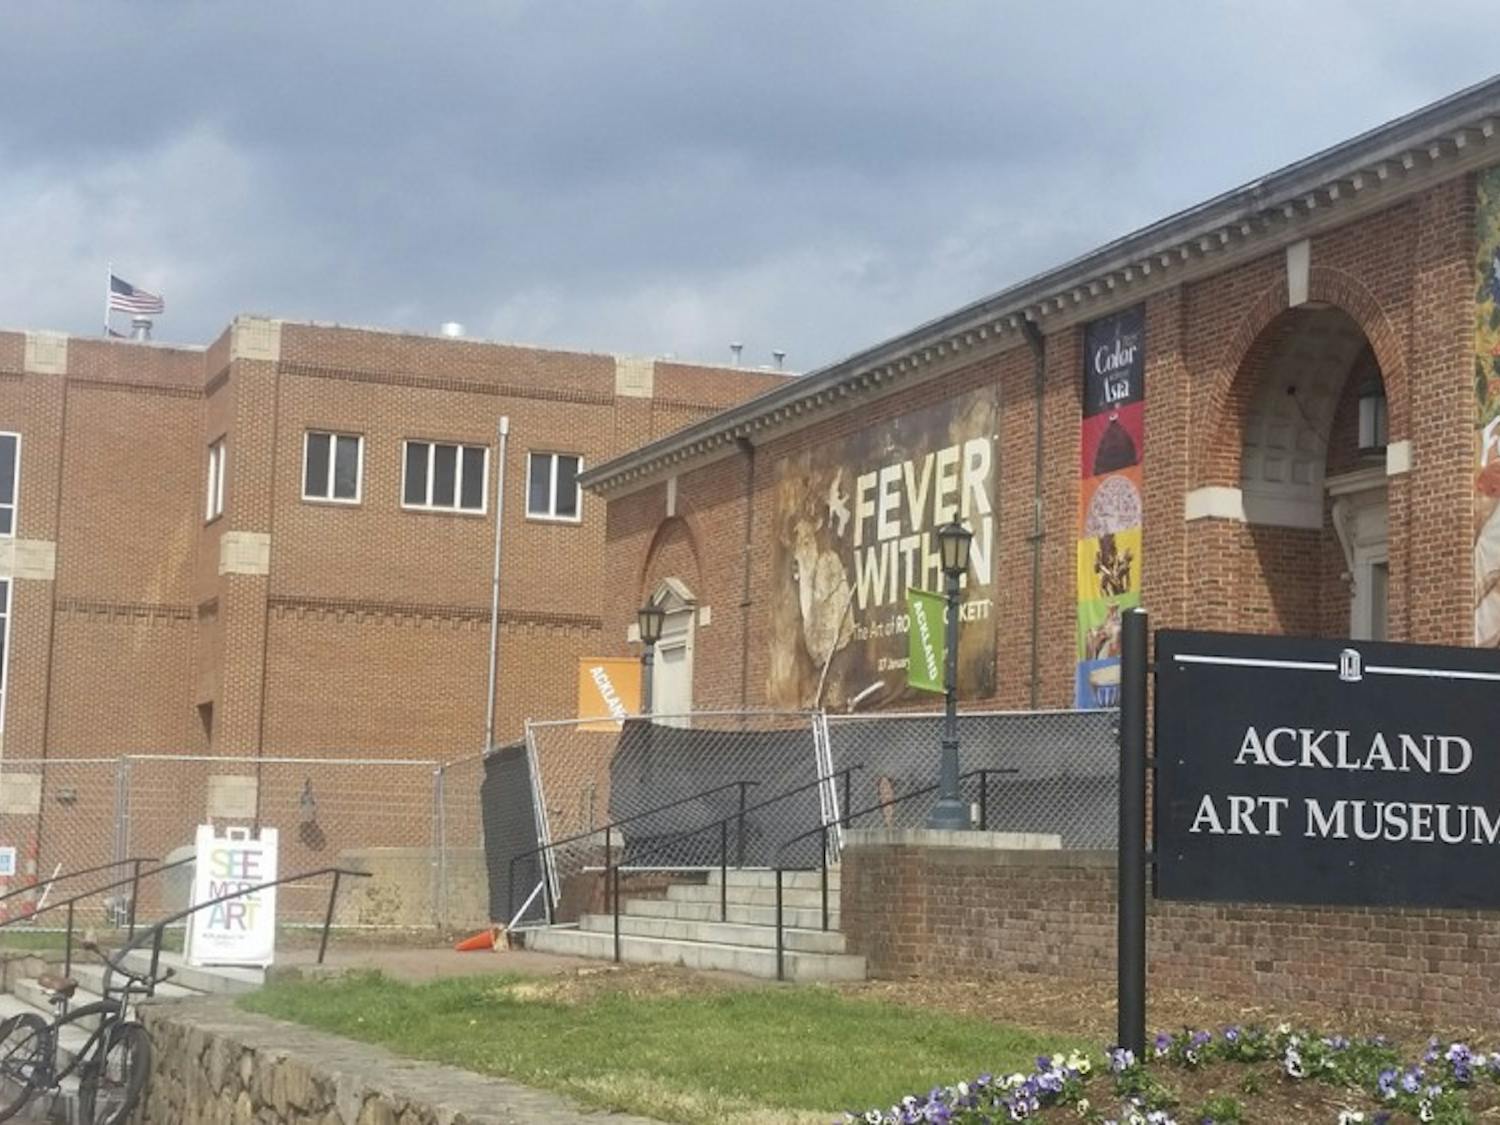 The Ackland Art Museum is closing for 13 days for construction.